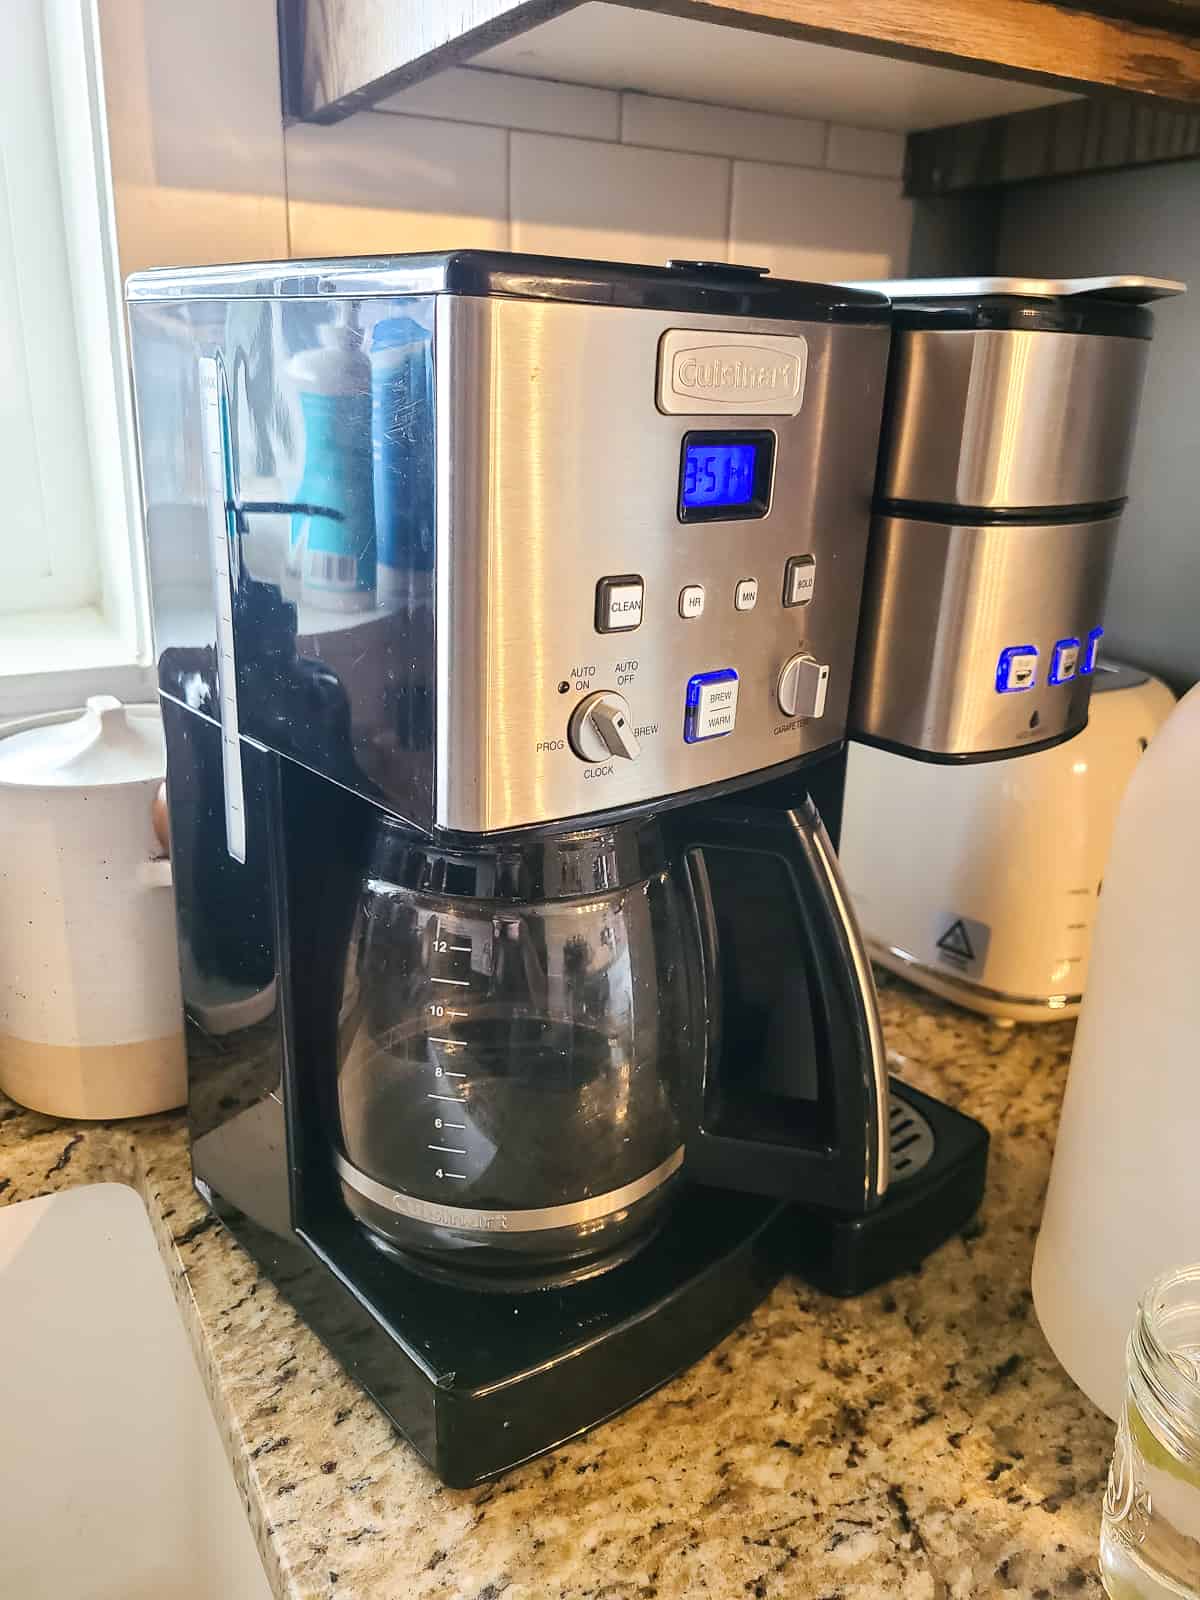 How to clean a Cuisinart coffee maker